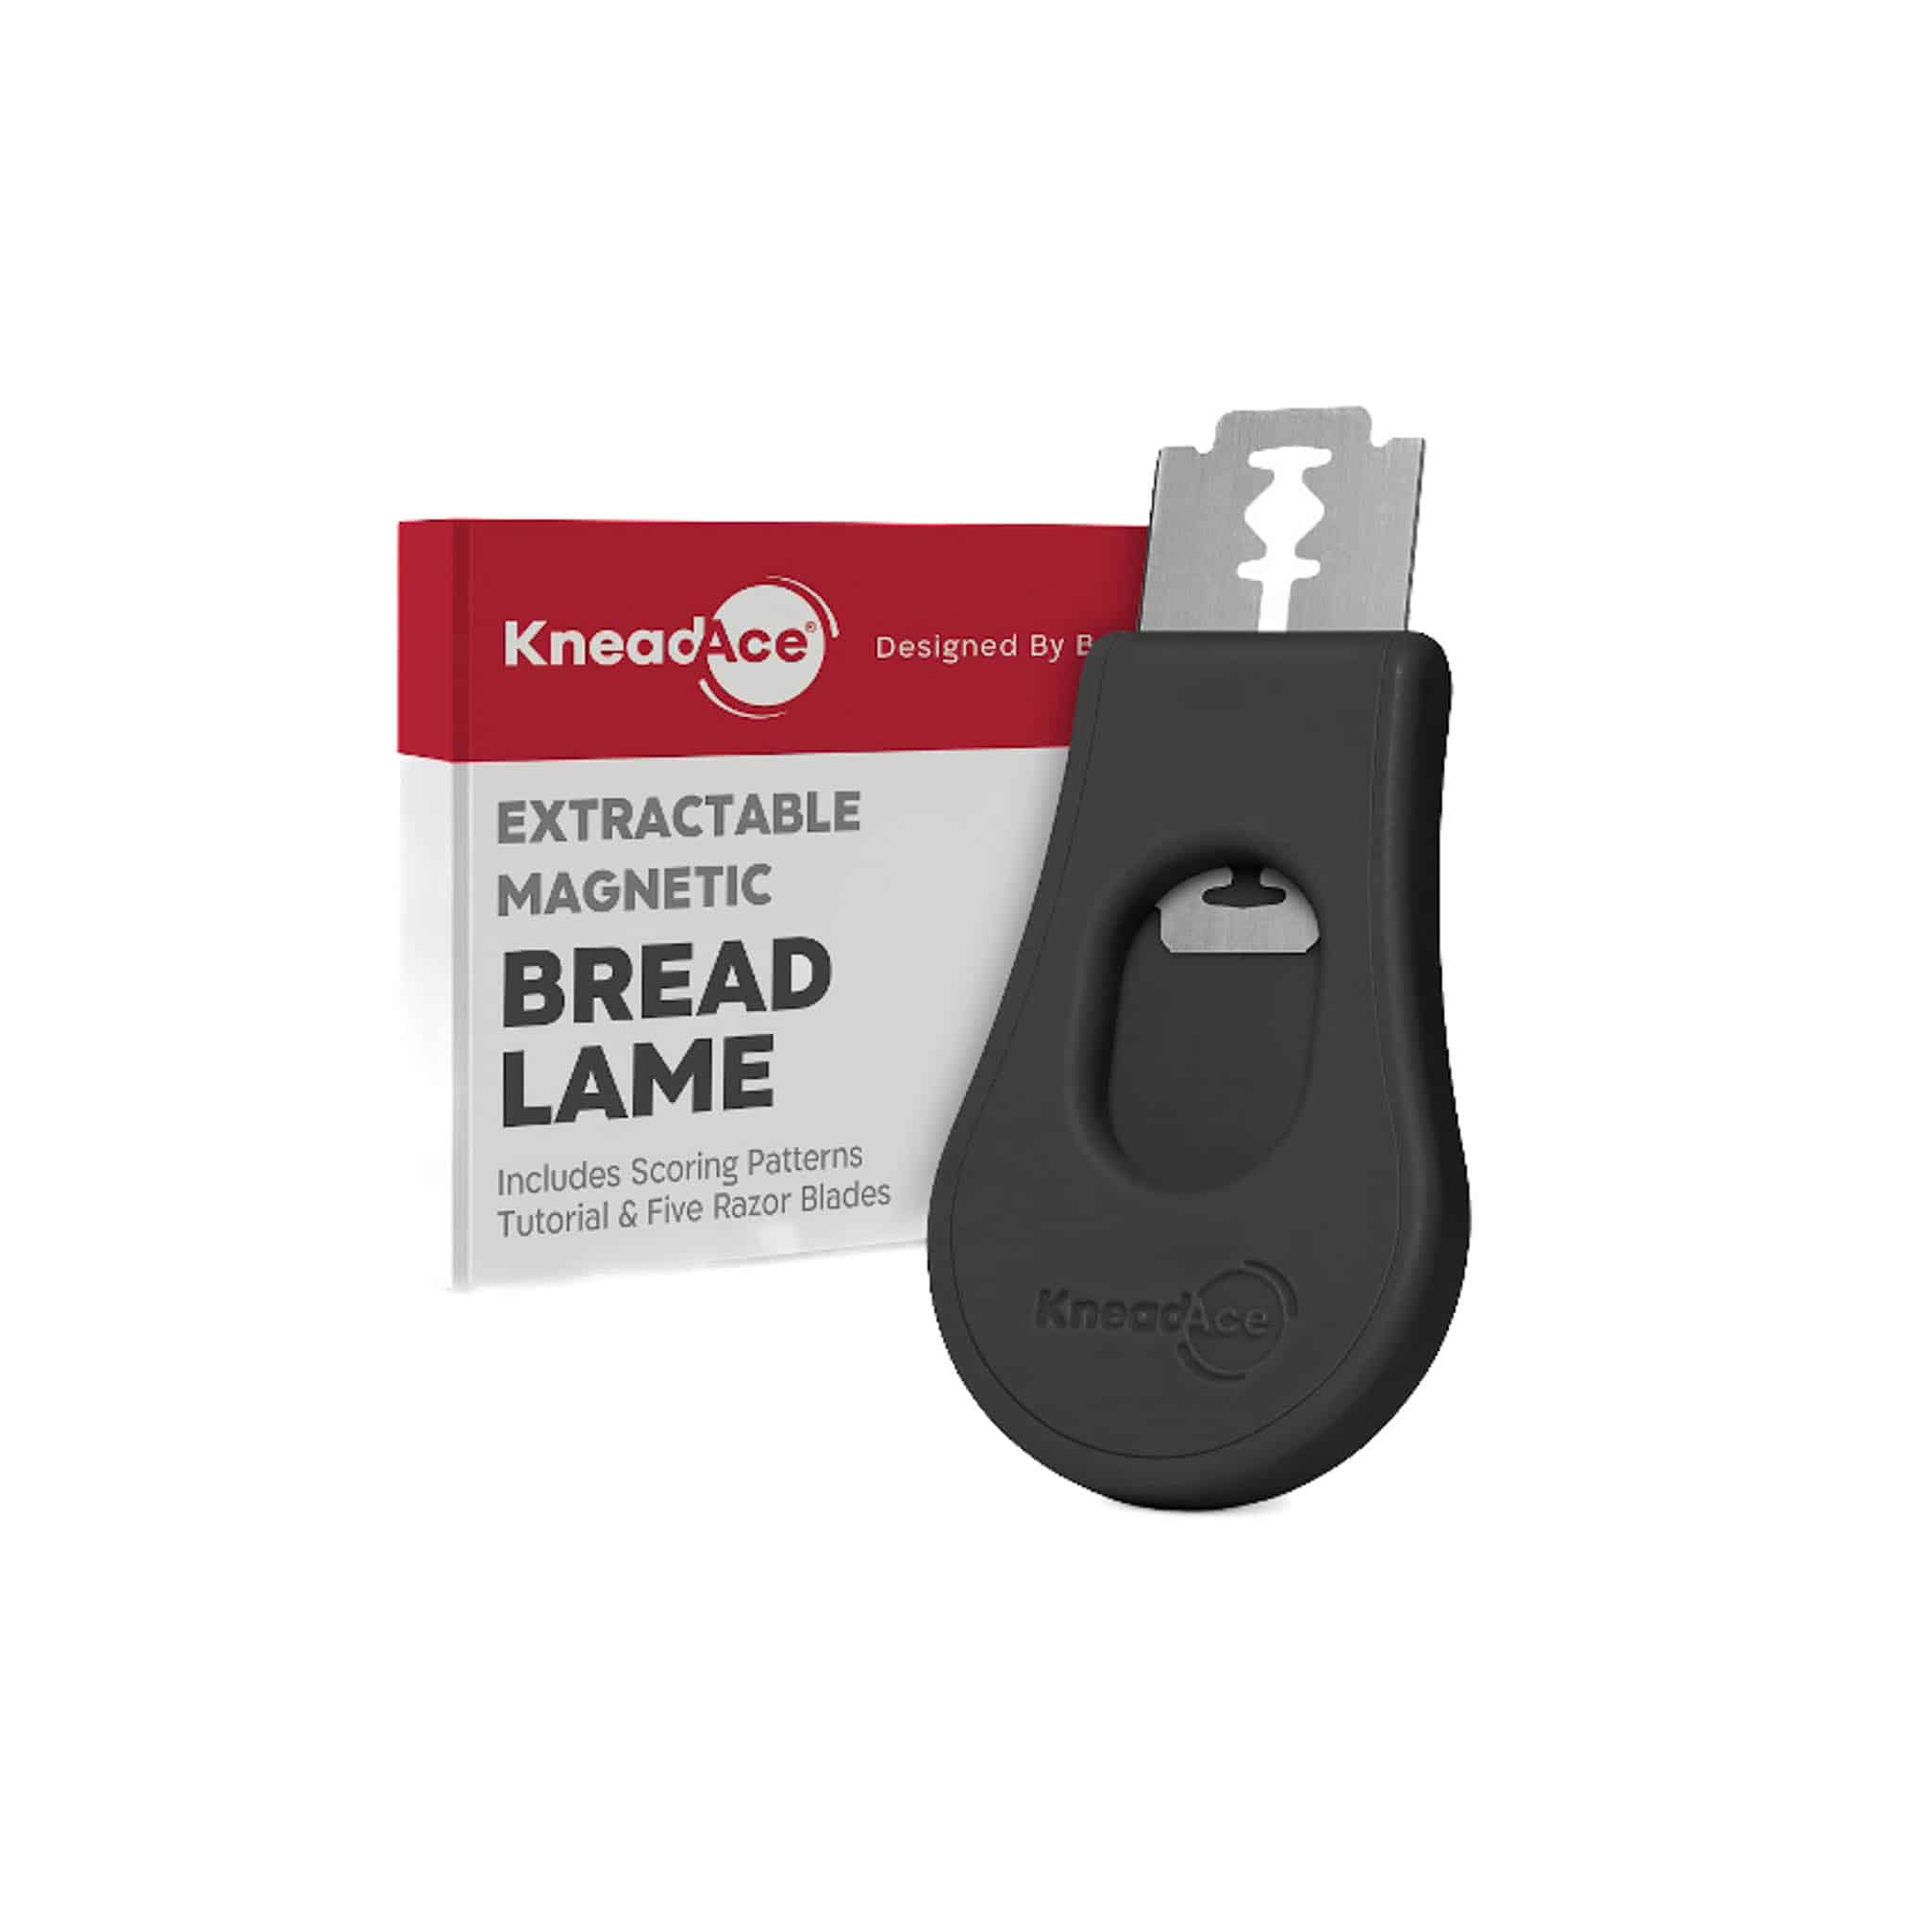 KneadAce Retractable & Magnetic Bread Lame